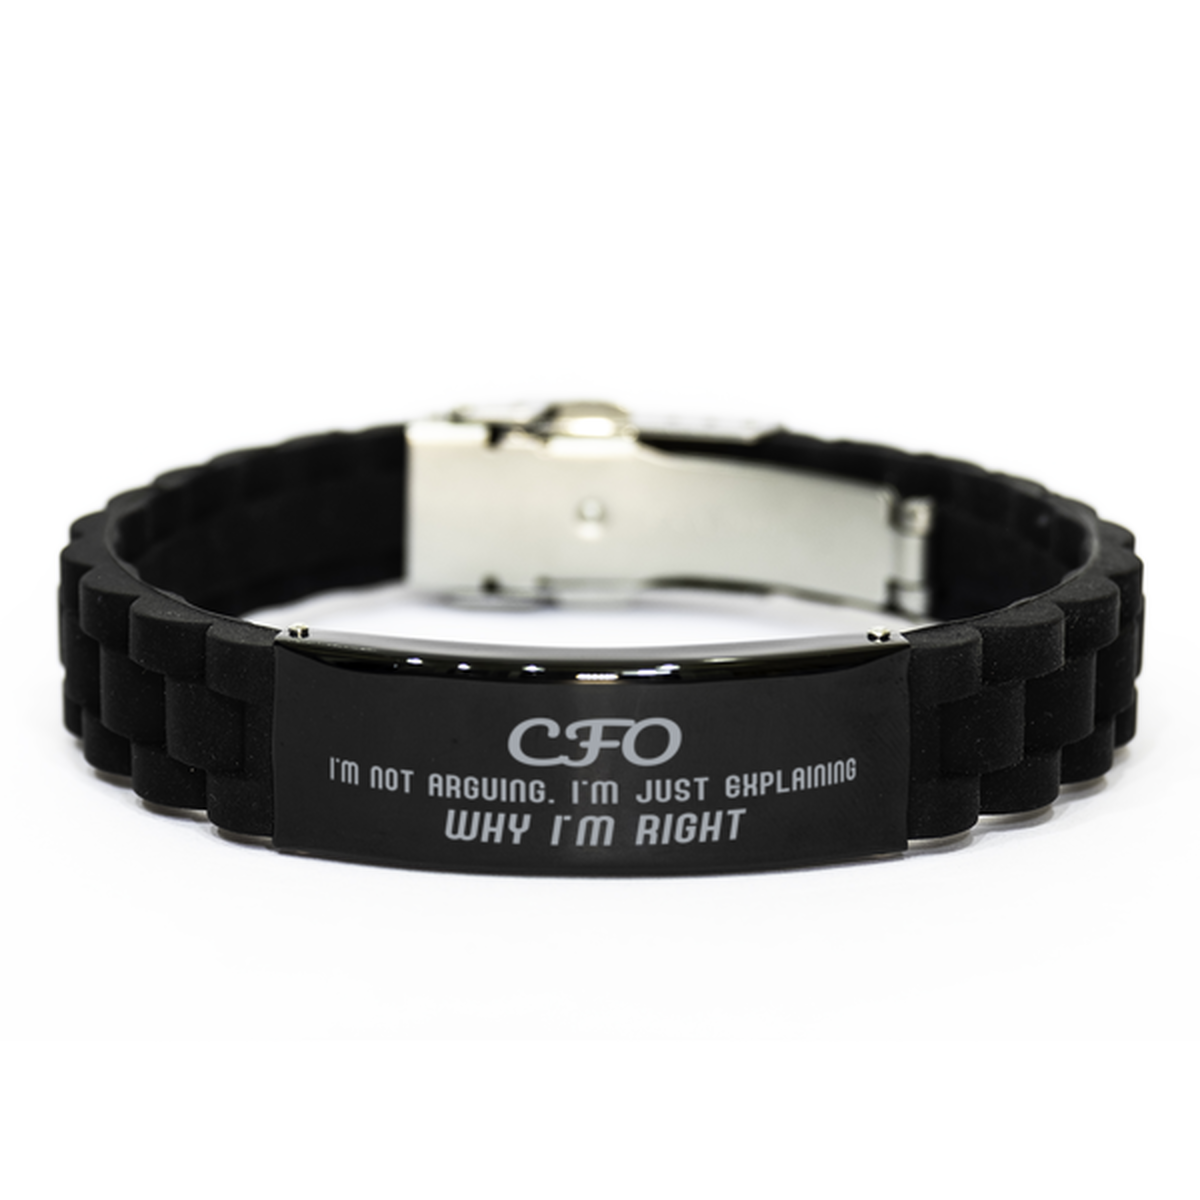 CFO I'm not Arguing. I'm Just Explaining Why I'm RIGHT Black Glidelock Clasp Bracelet, Funny Saying Quote CFO Gifts For CFO Graduation Birthday Christmas Gifts for Men Women Coworker